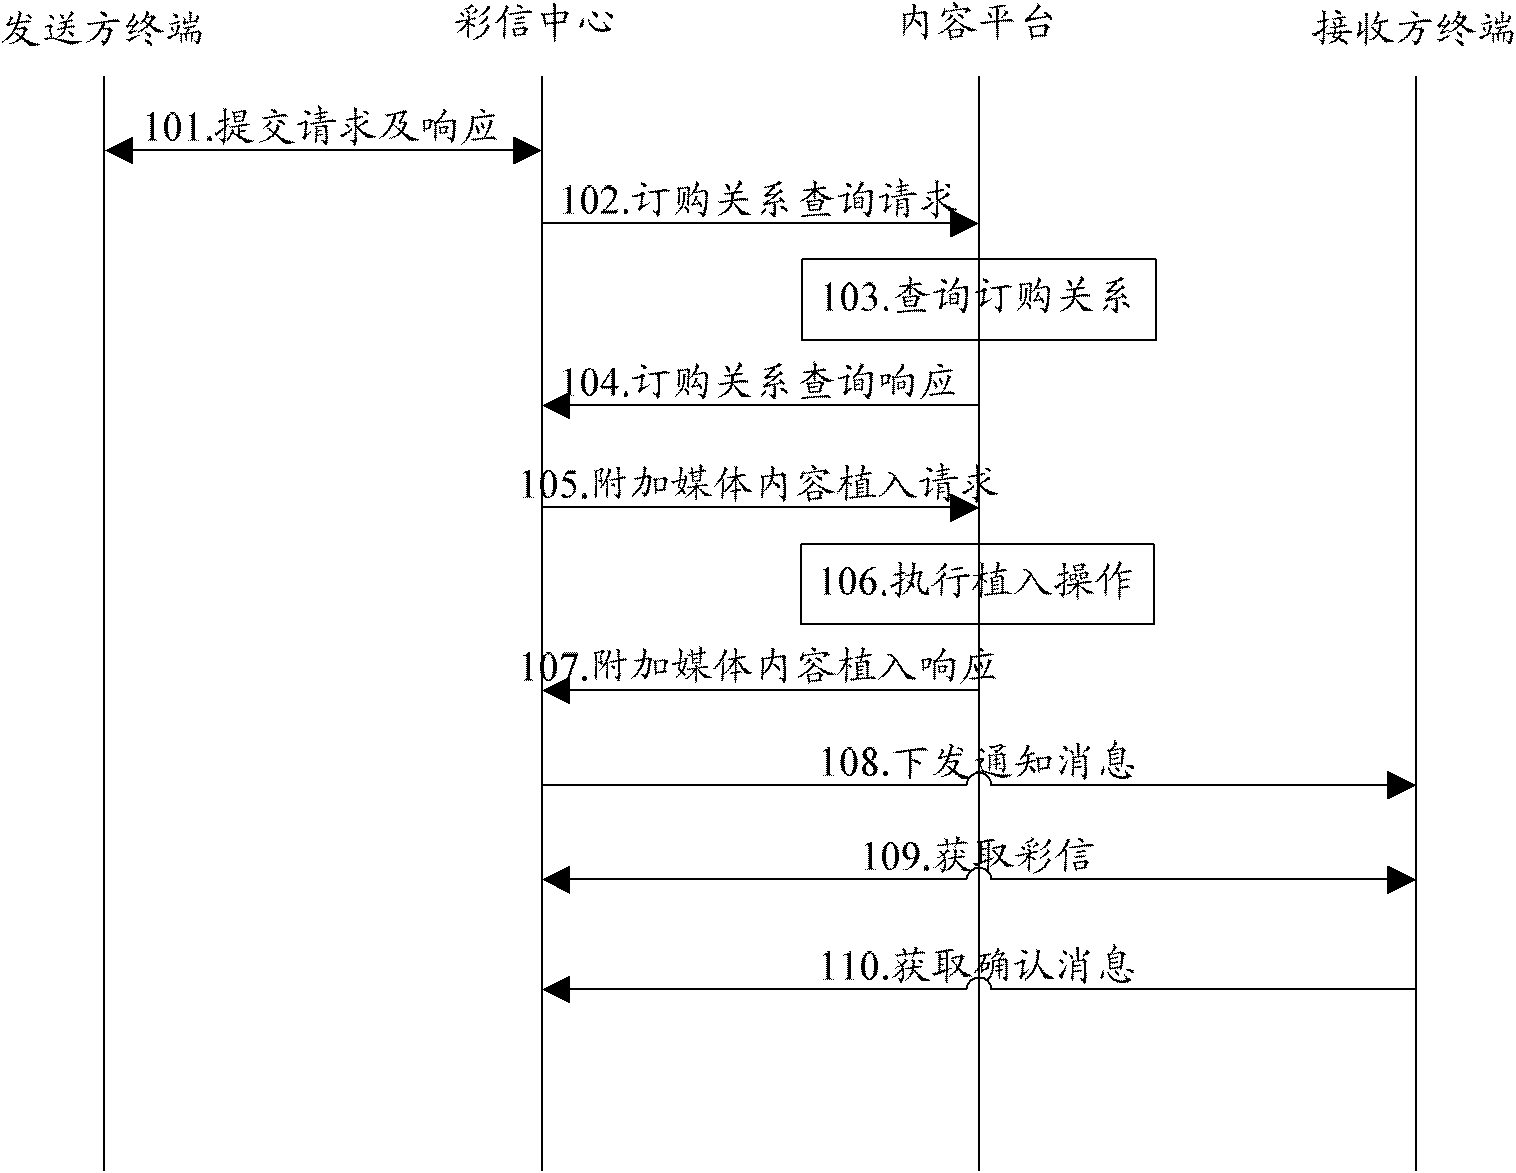 Method and system for implanting multimedia message contents